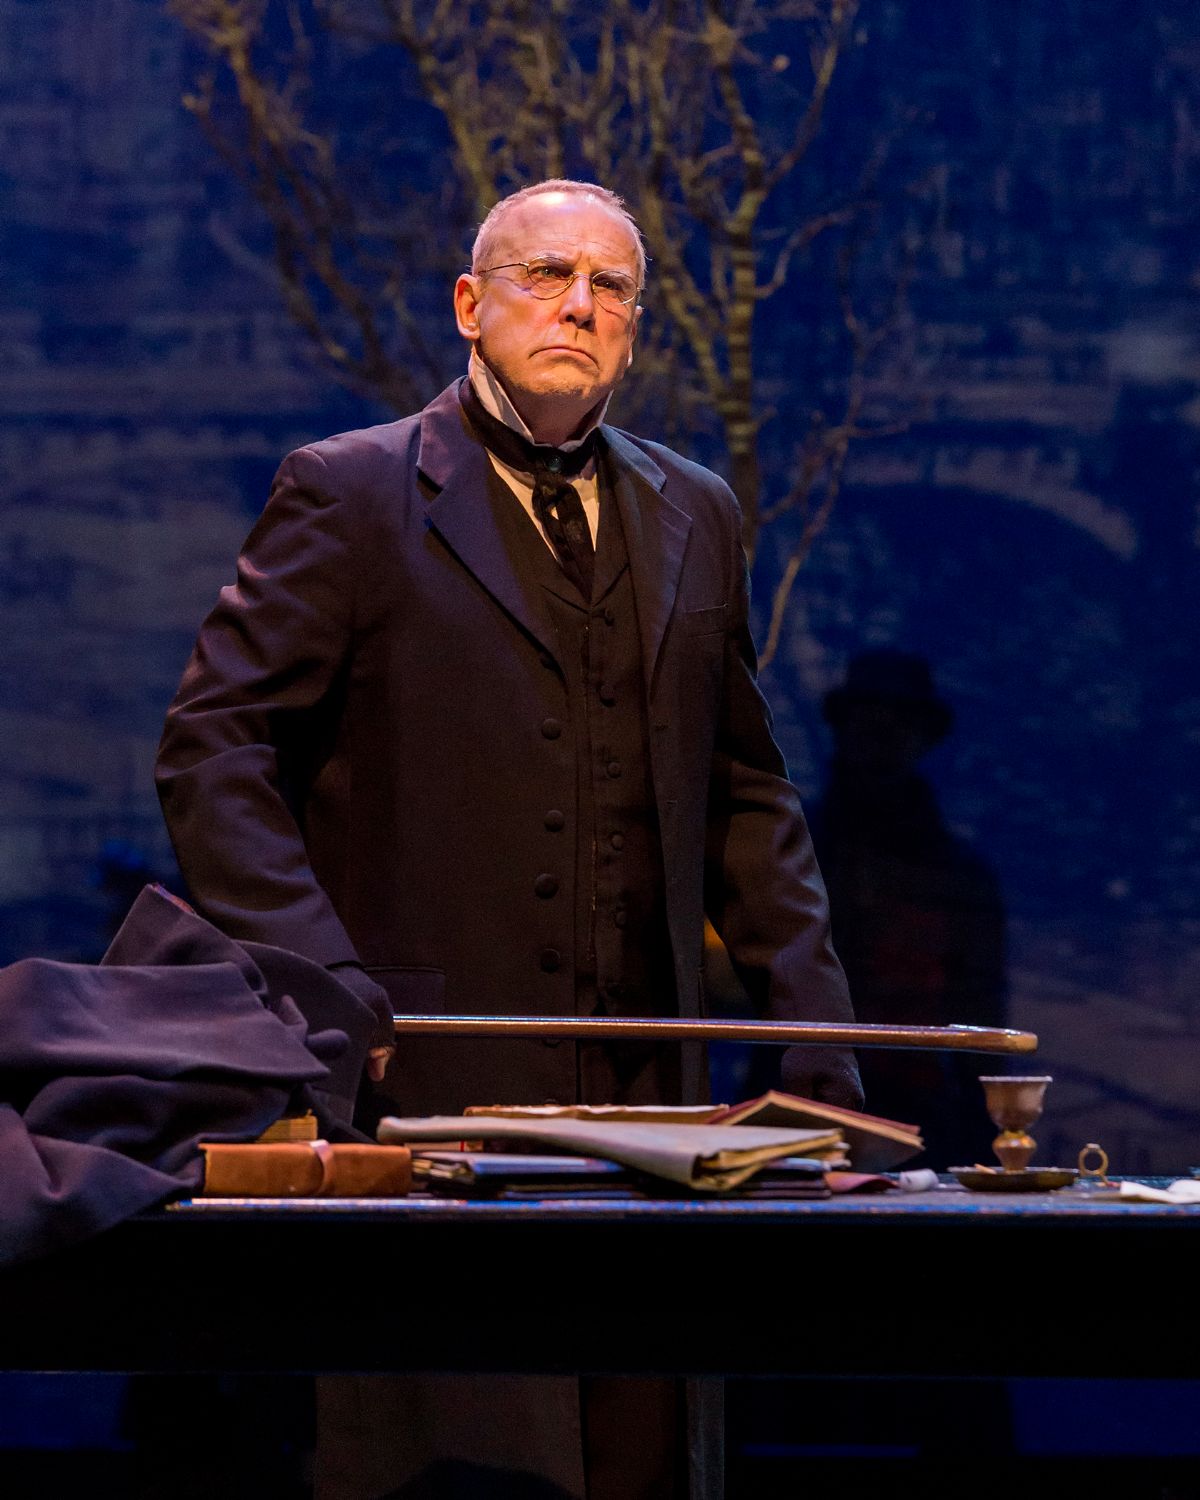 PHOTO: Craig Schwartz | The South Pasadenan | Geoff Elliott is Scrooge in A Christmas Carol at A Noise Within.